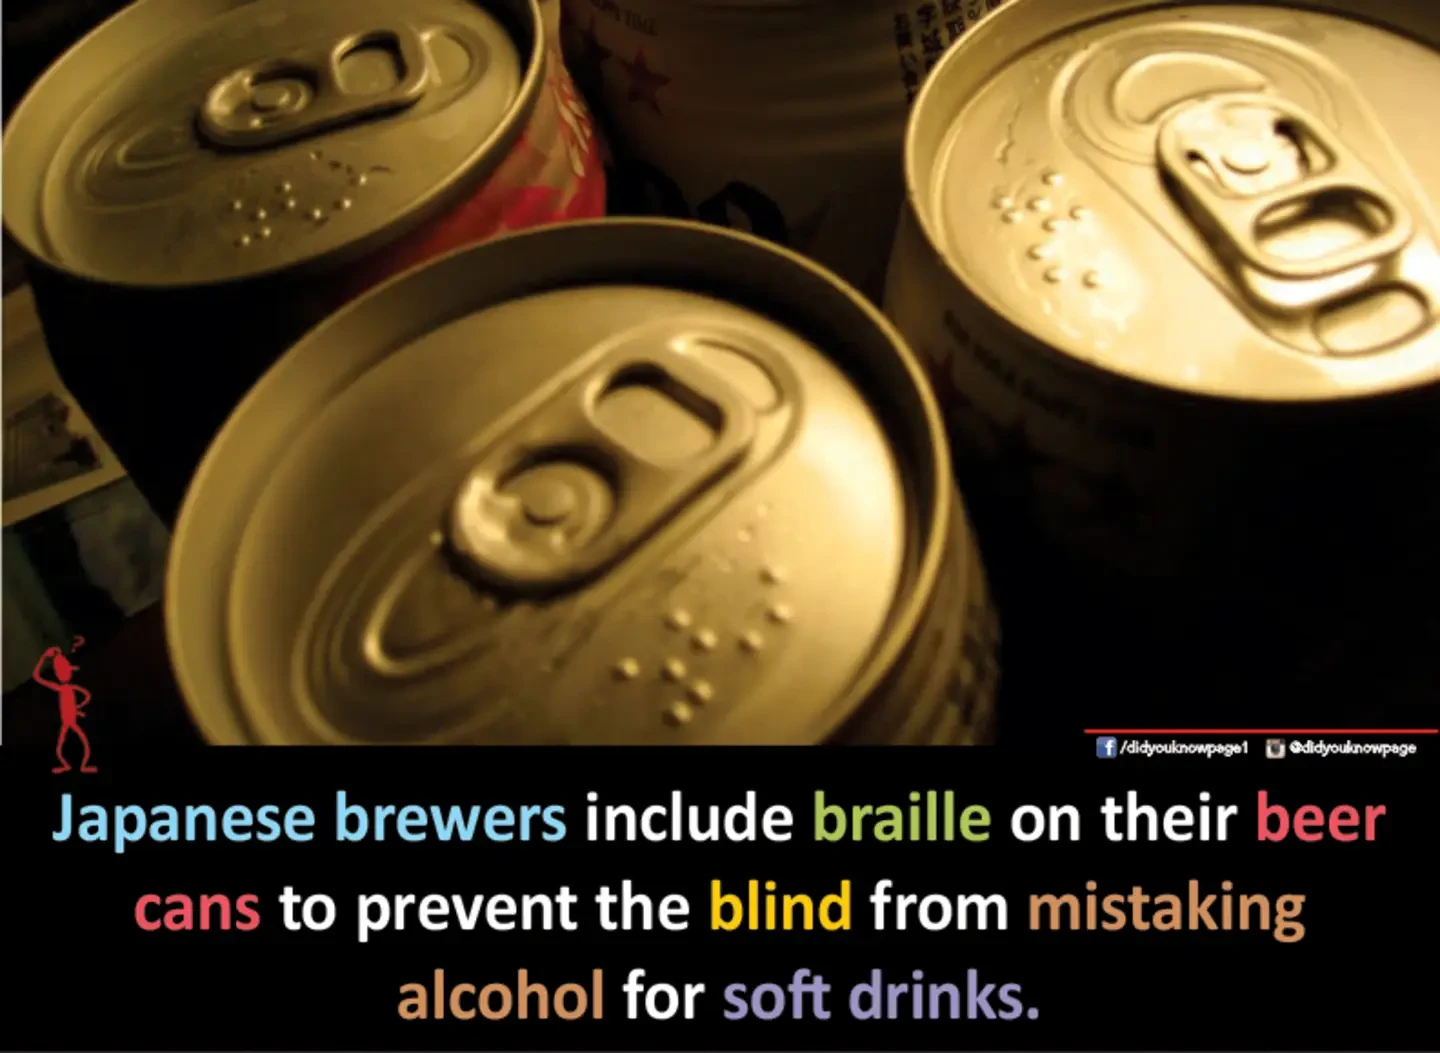 Japanese brewers include braille on their beer cans to prevent the blind from mistaking alcohol for soft drinks. Image shows the described braille on a can, next to the tab.